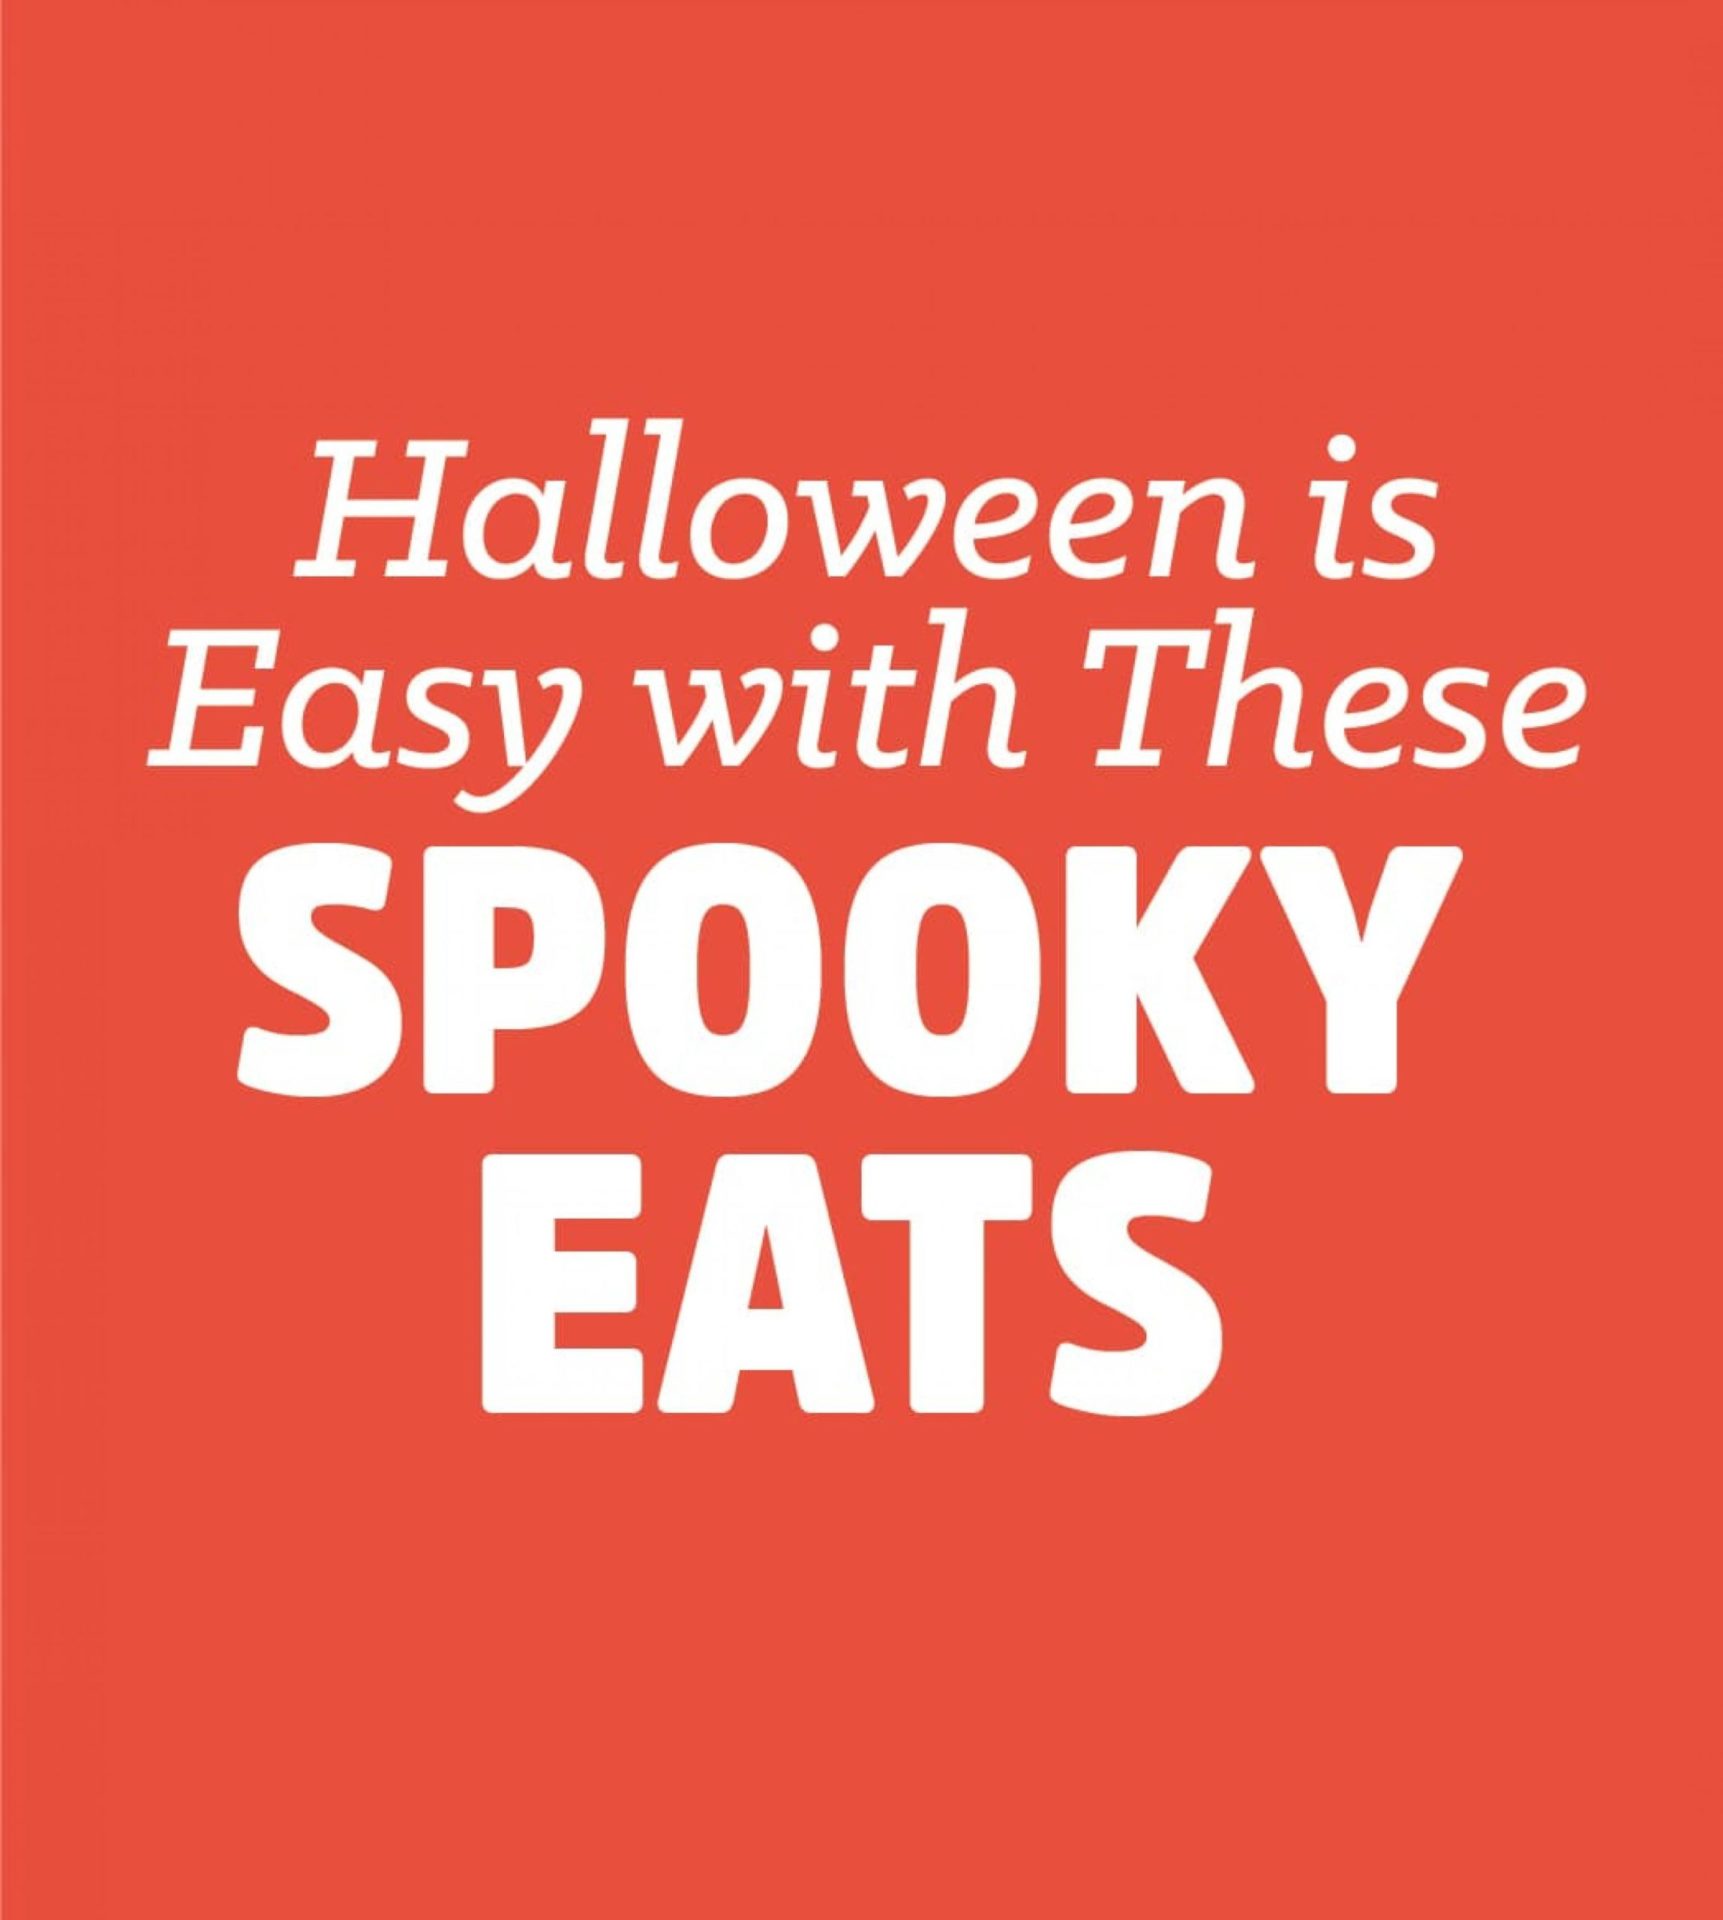 Halloween is Easy with These SPOOKY EATS